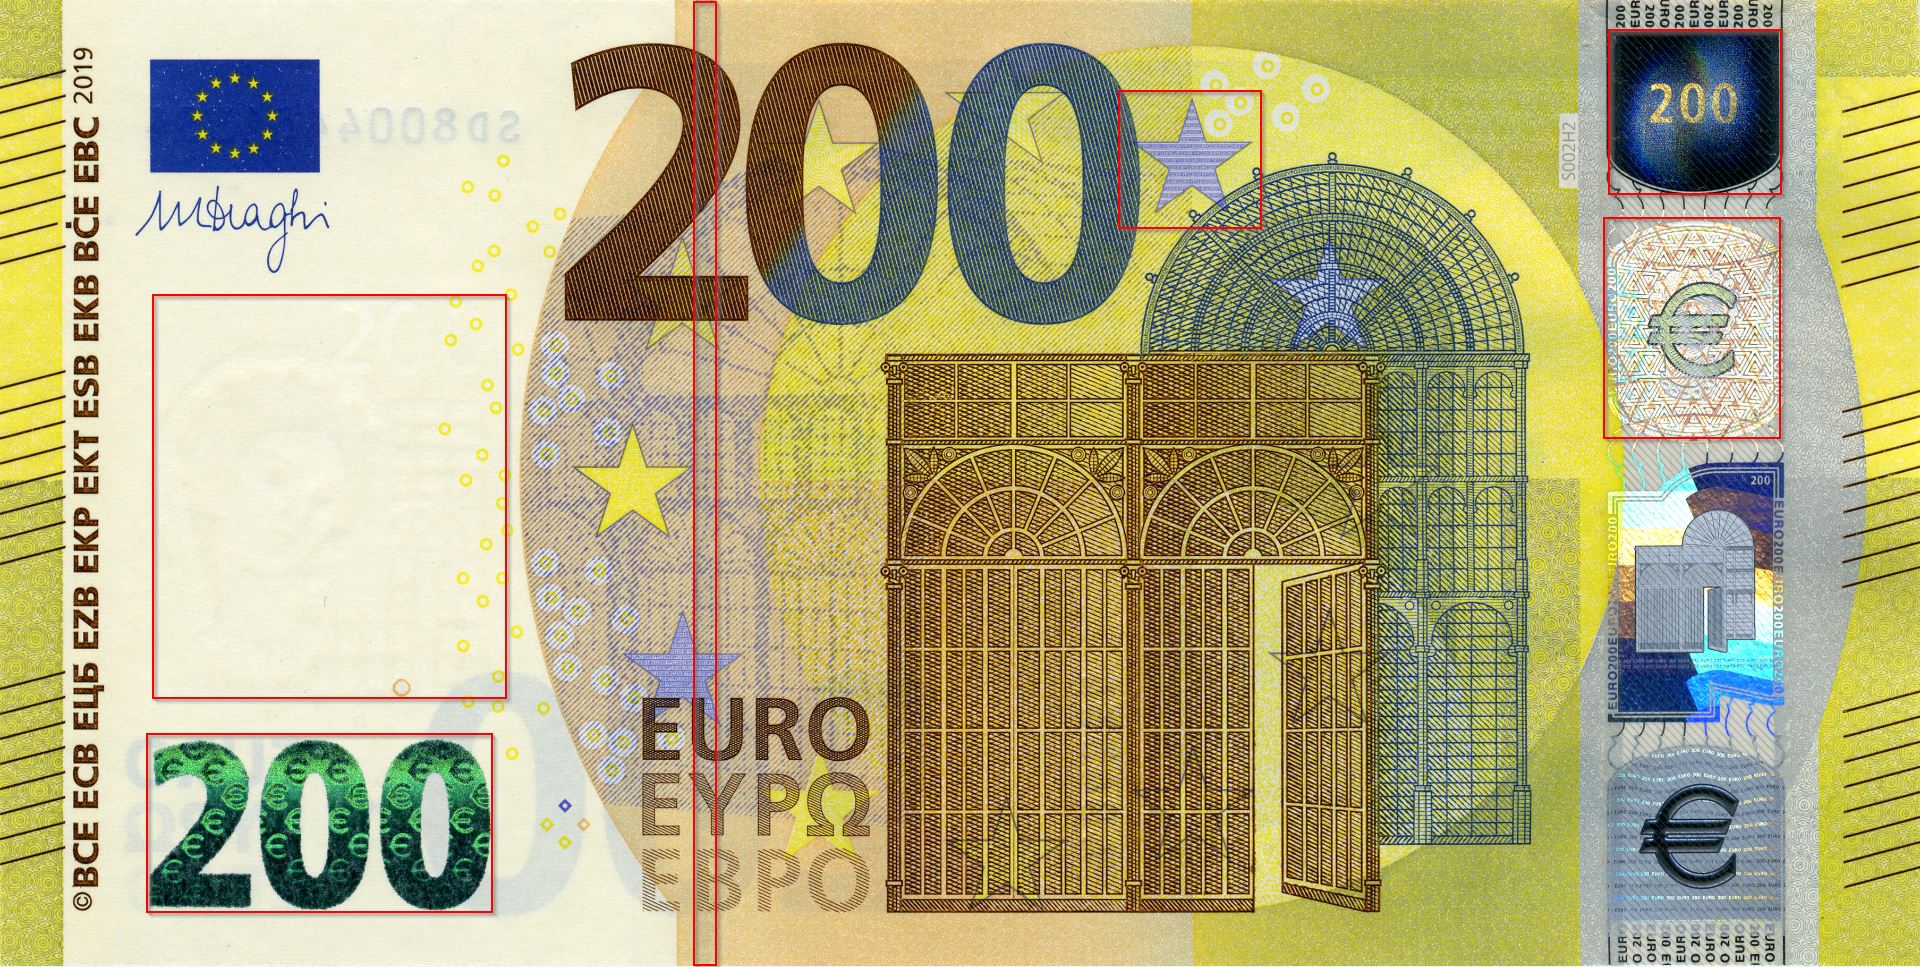 Gold-plated souvenir banknote 200 Euro in a security file